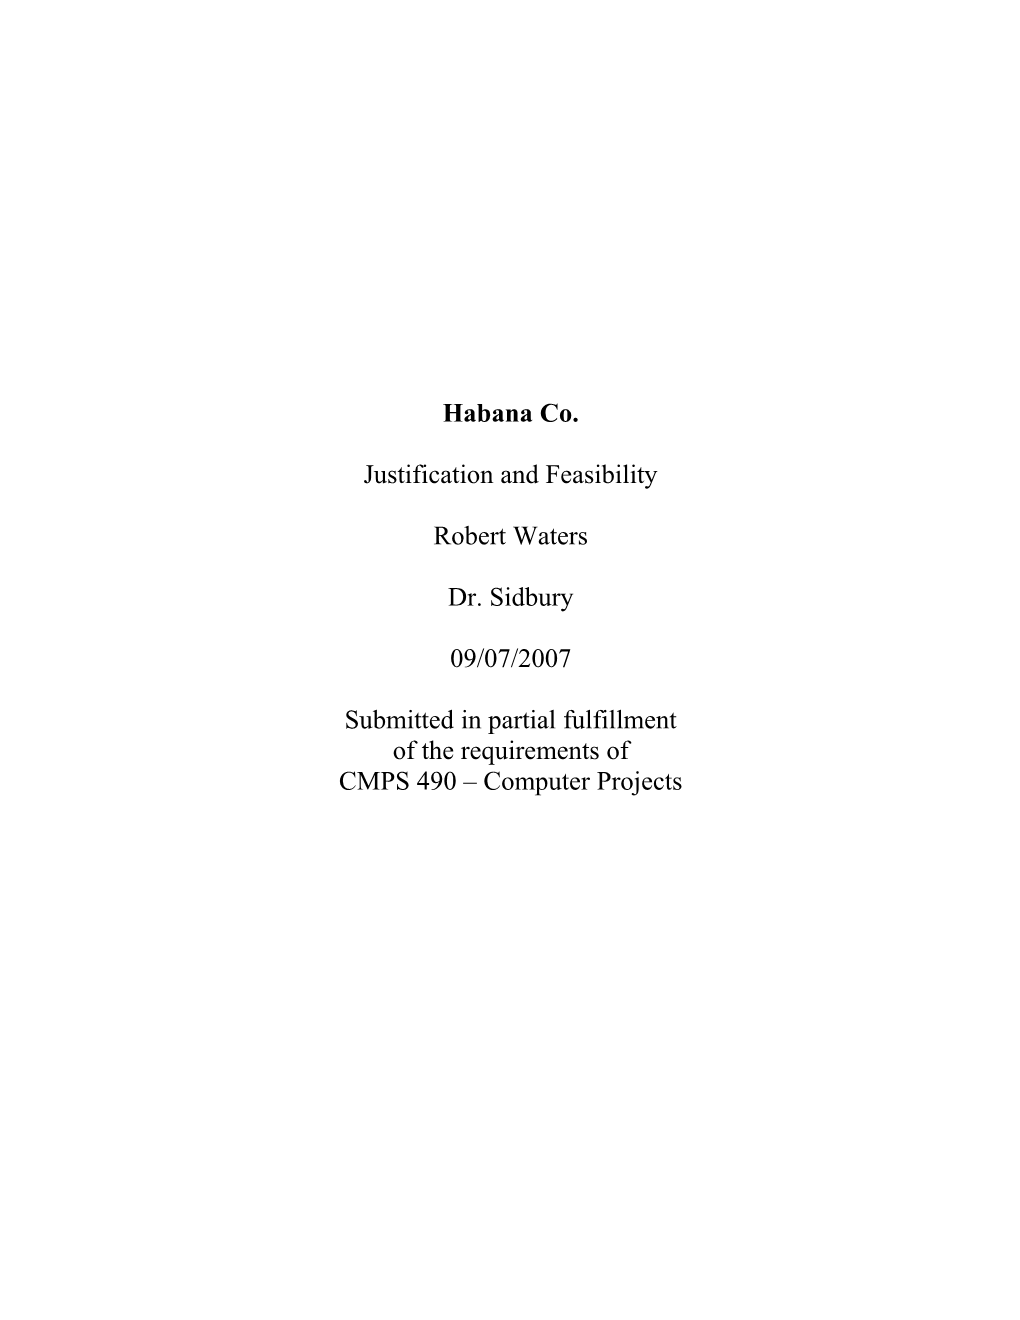 Report #2 - Justification and Feasibility1